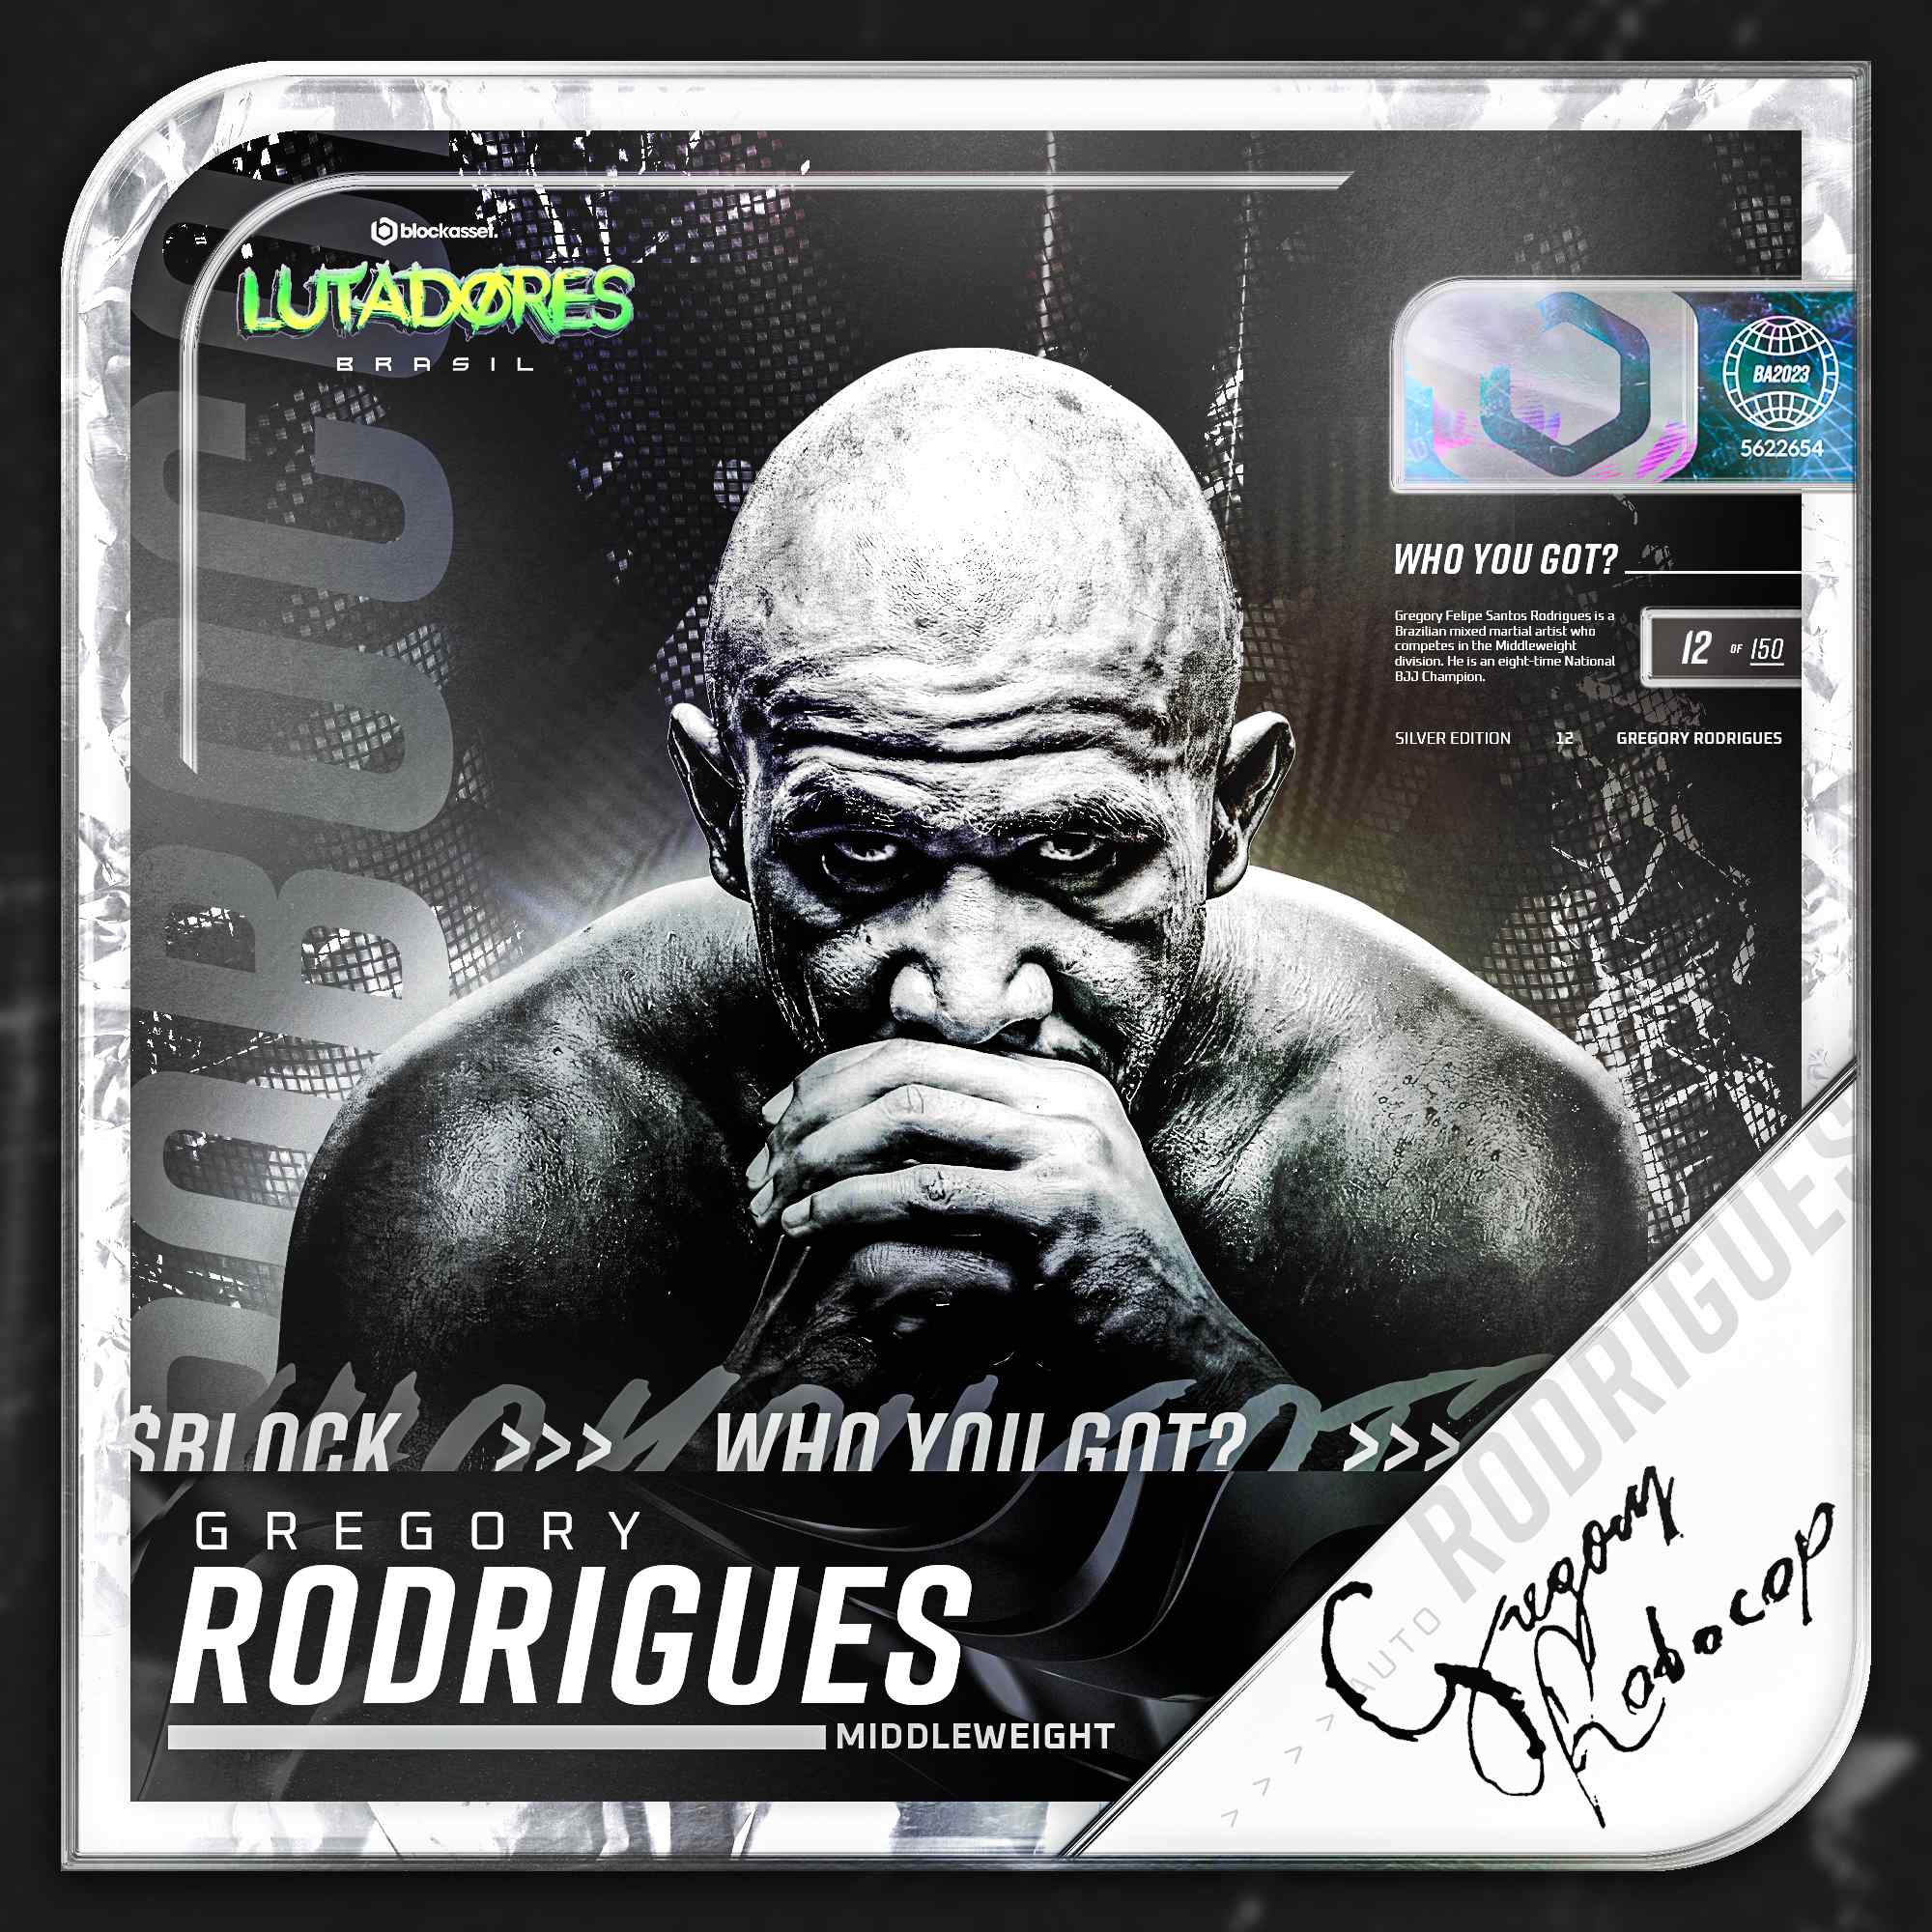 Gregory Rodrigues #112